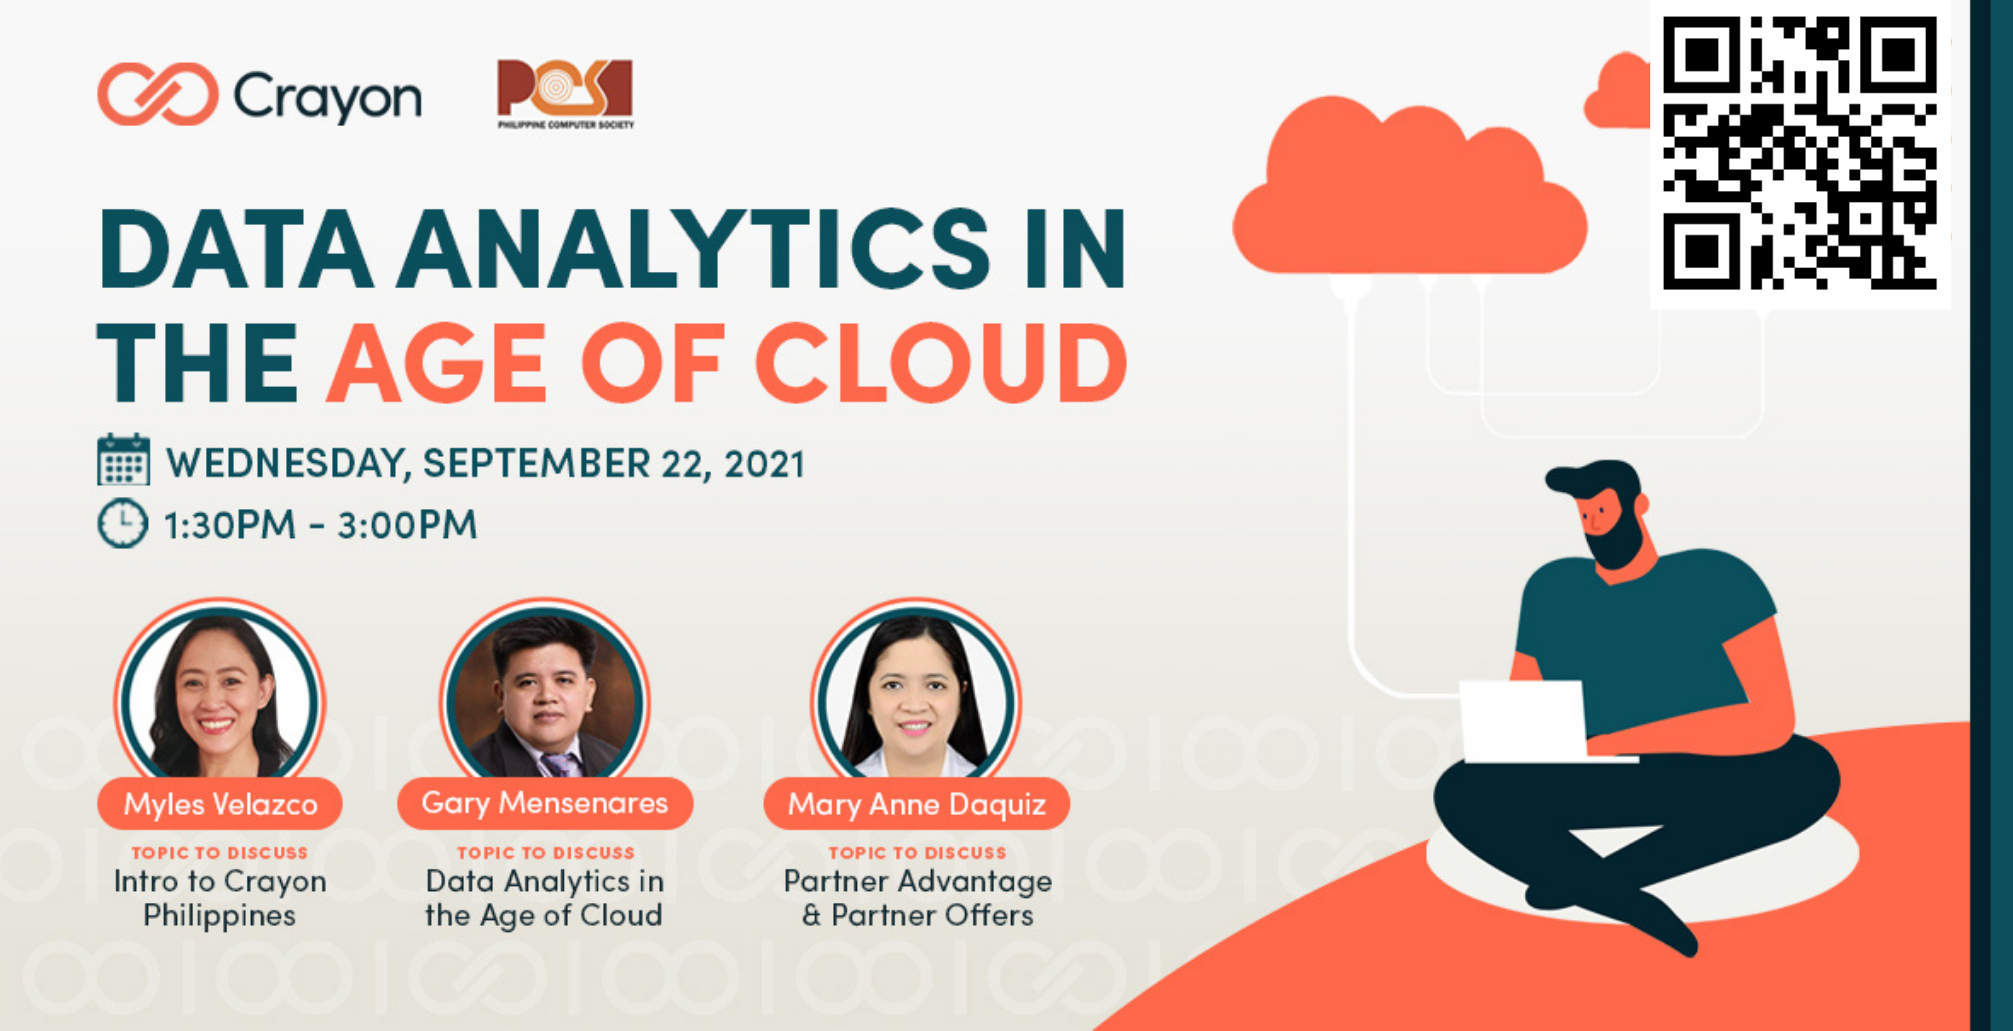 DATA ANALYTICS IN THE AGE OF CLOUD